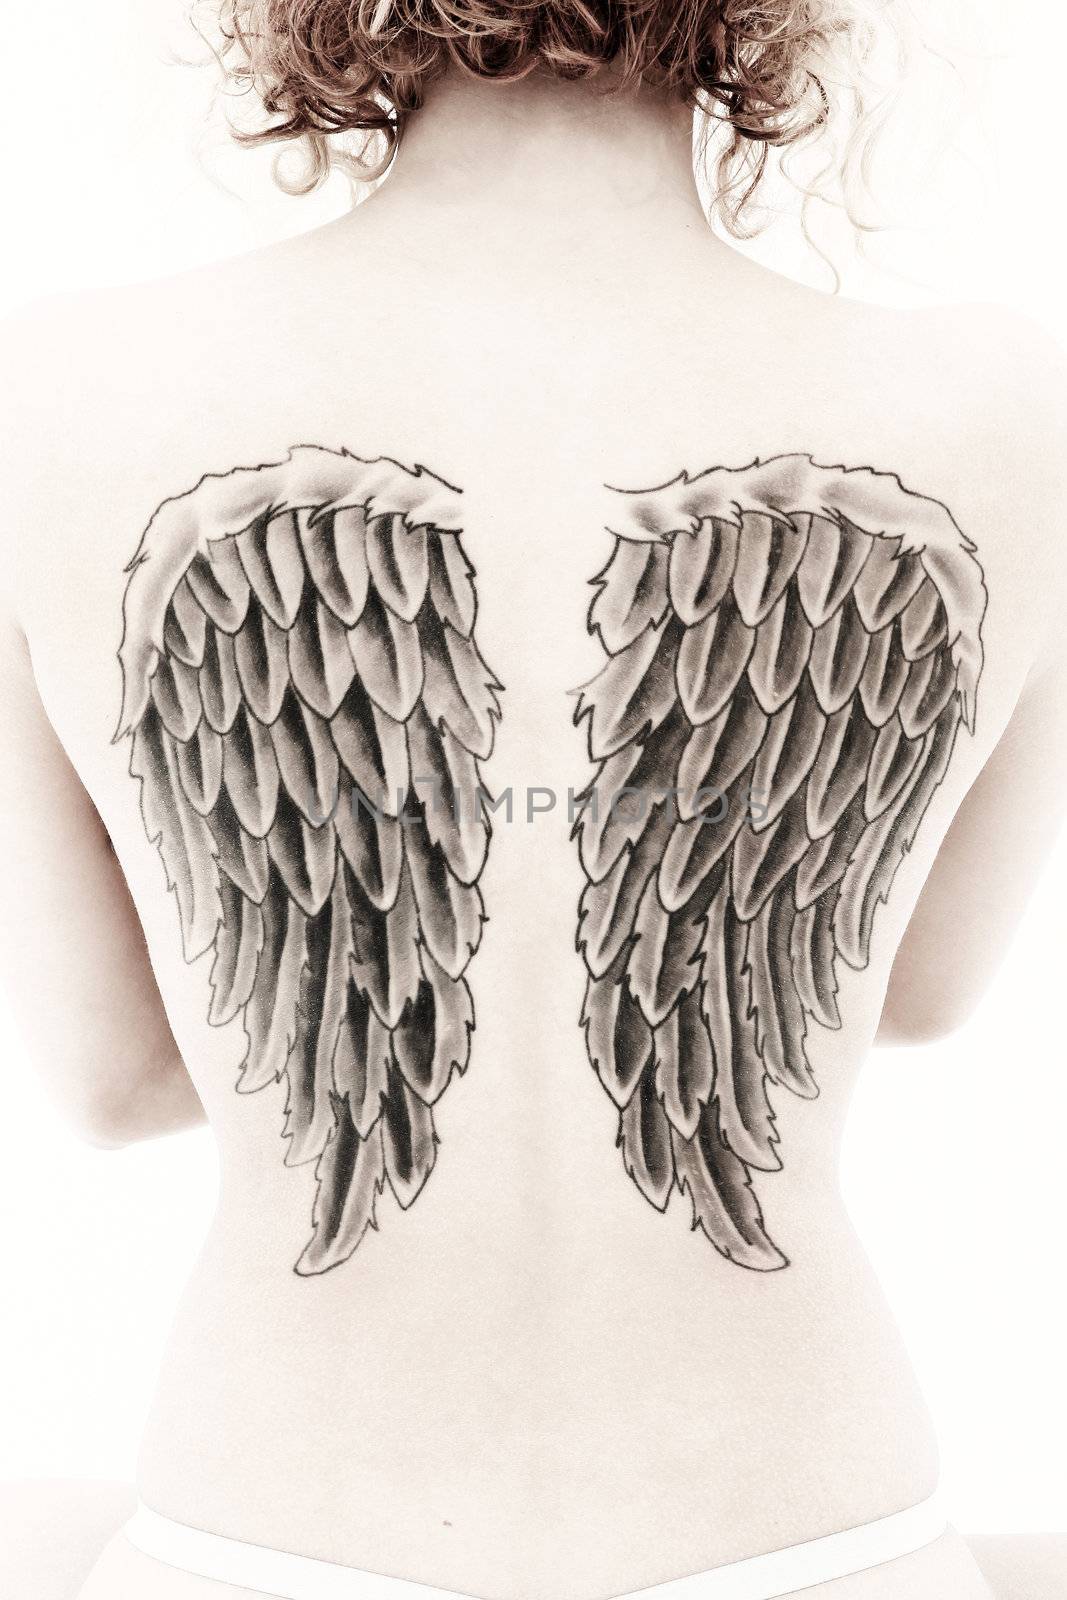 Sepia image of woman's back with large wing tattoos.